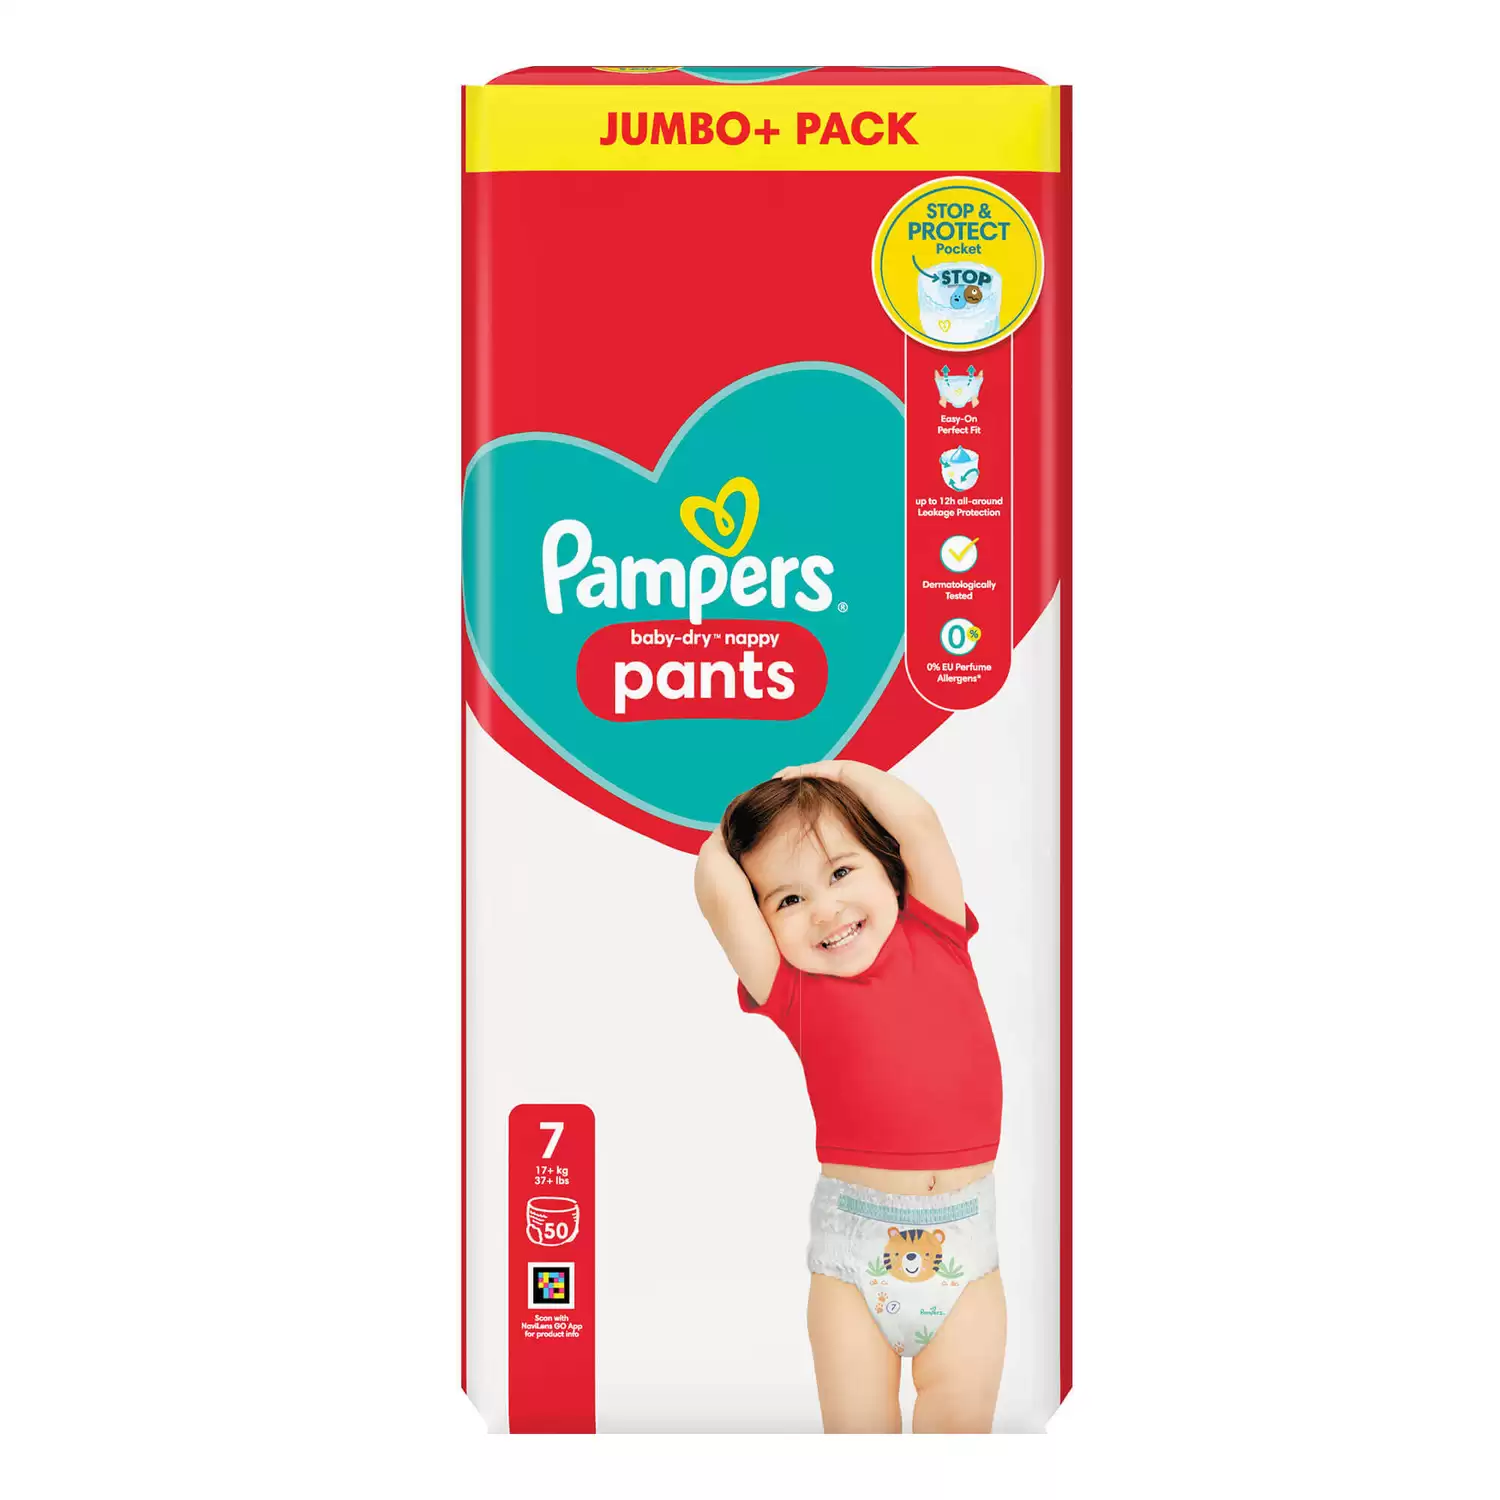 Pampers Baby Dry Nappy Pants Size 7 50 Pack - Gompels - Care